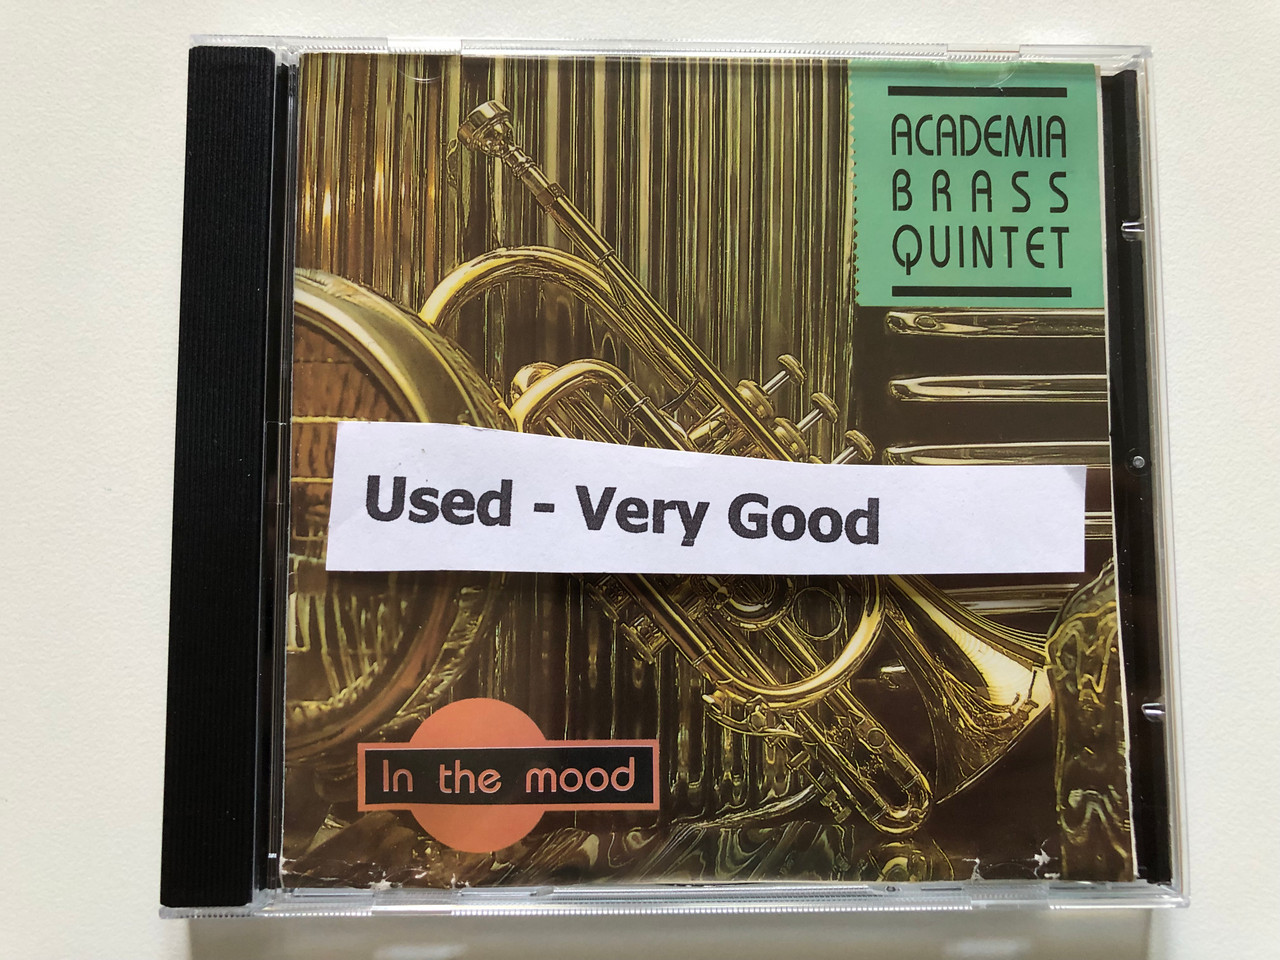 https://cdn10.bigcommerce.com/s-62bdpkt7pb/products/0/images/308001/Academia_Brass_Quintet_In_The_Mood_Audio_CD_1993_ABQ_5002_7__87062.1698918490.1280.1280.JPG?c=2